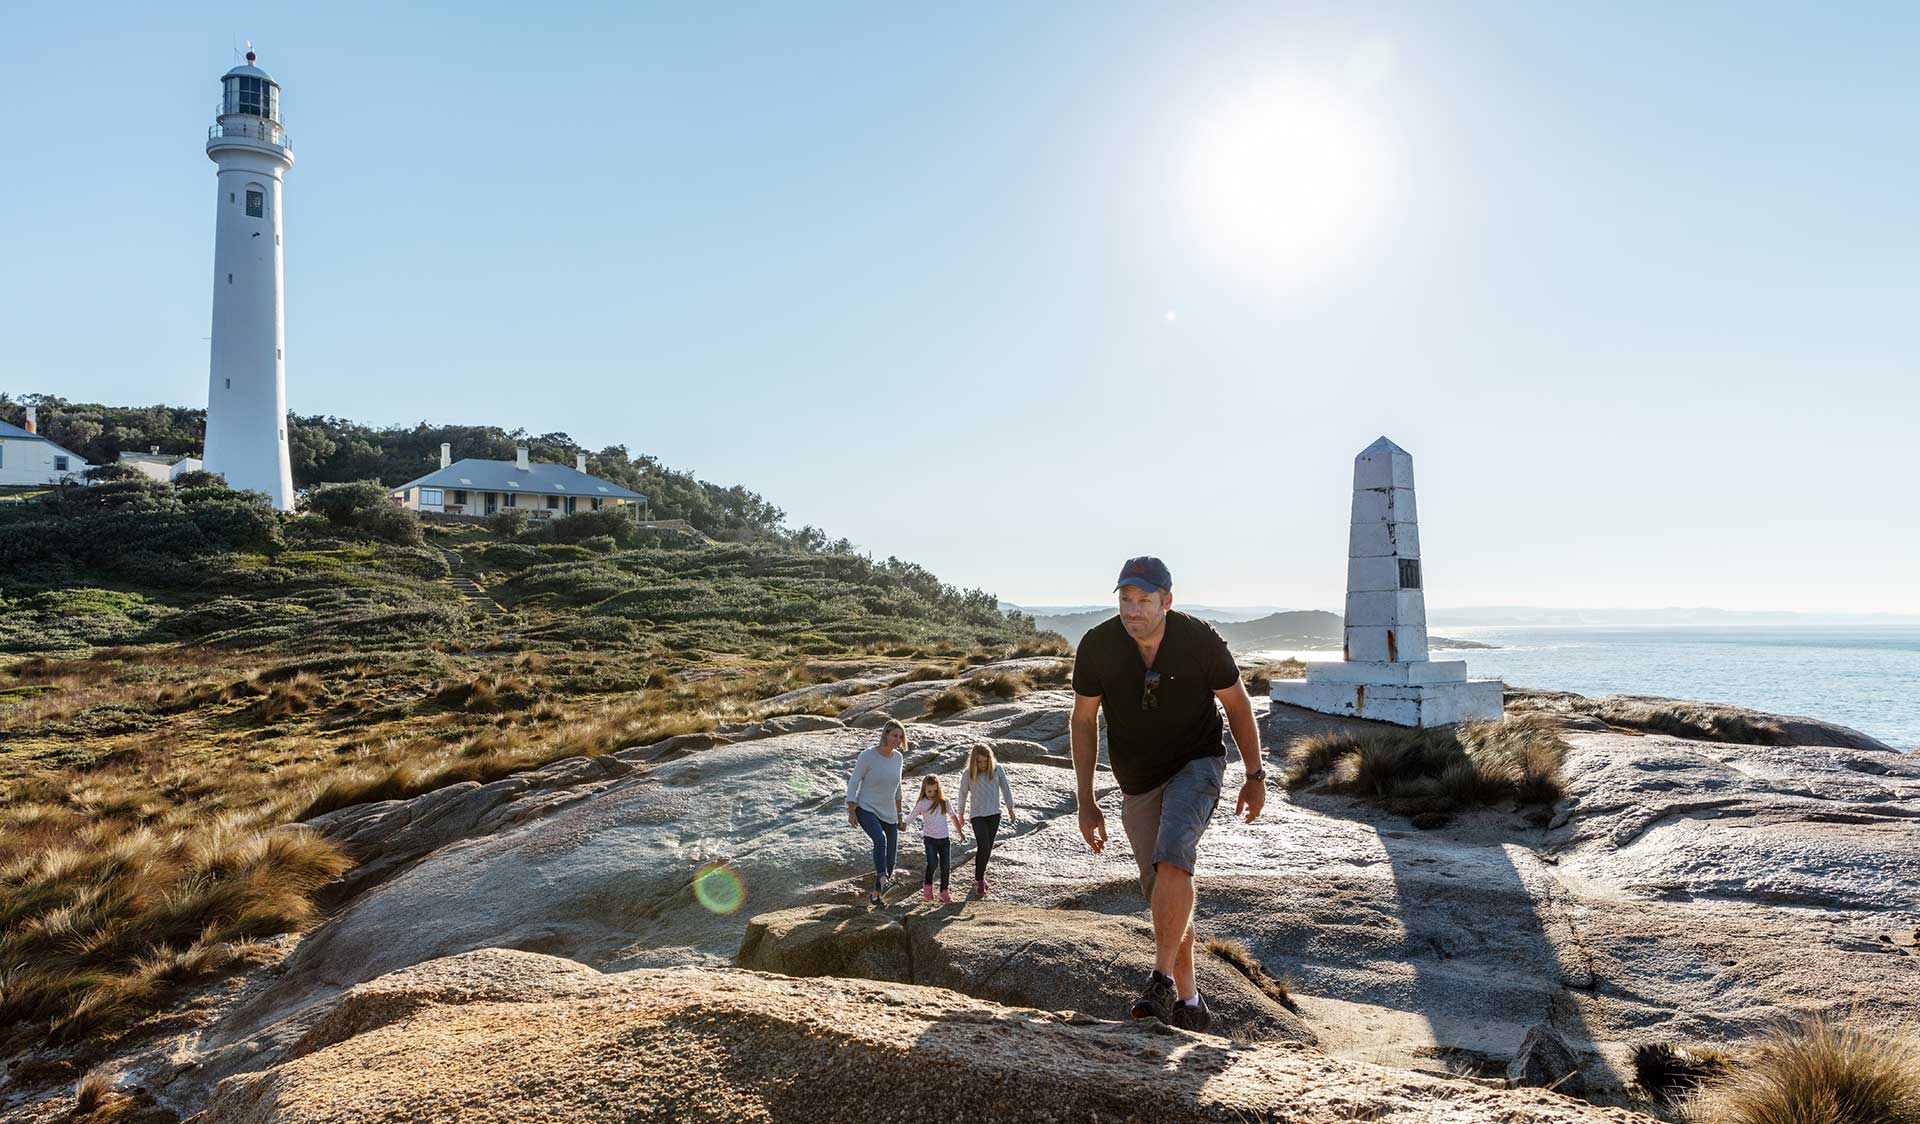 A father leads his family across the rocks in front of the Point Hicks Lighthouse and cottage.